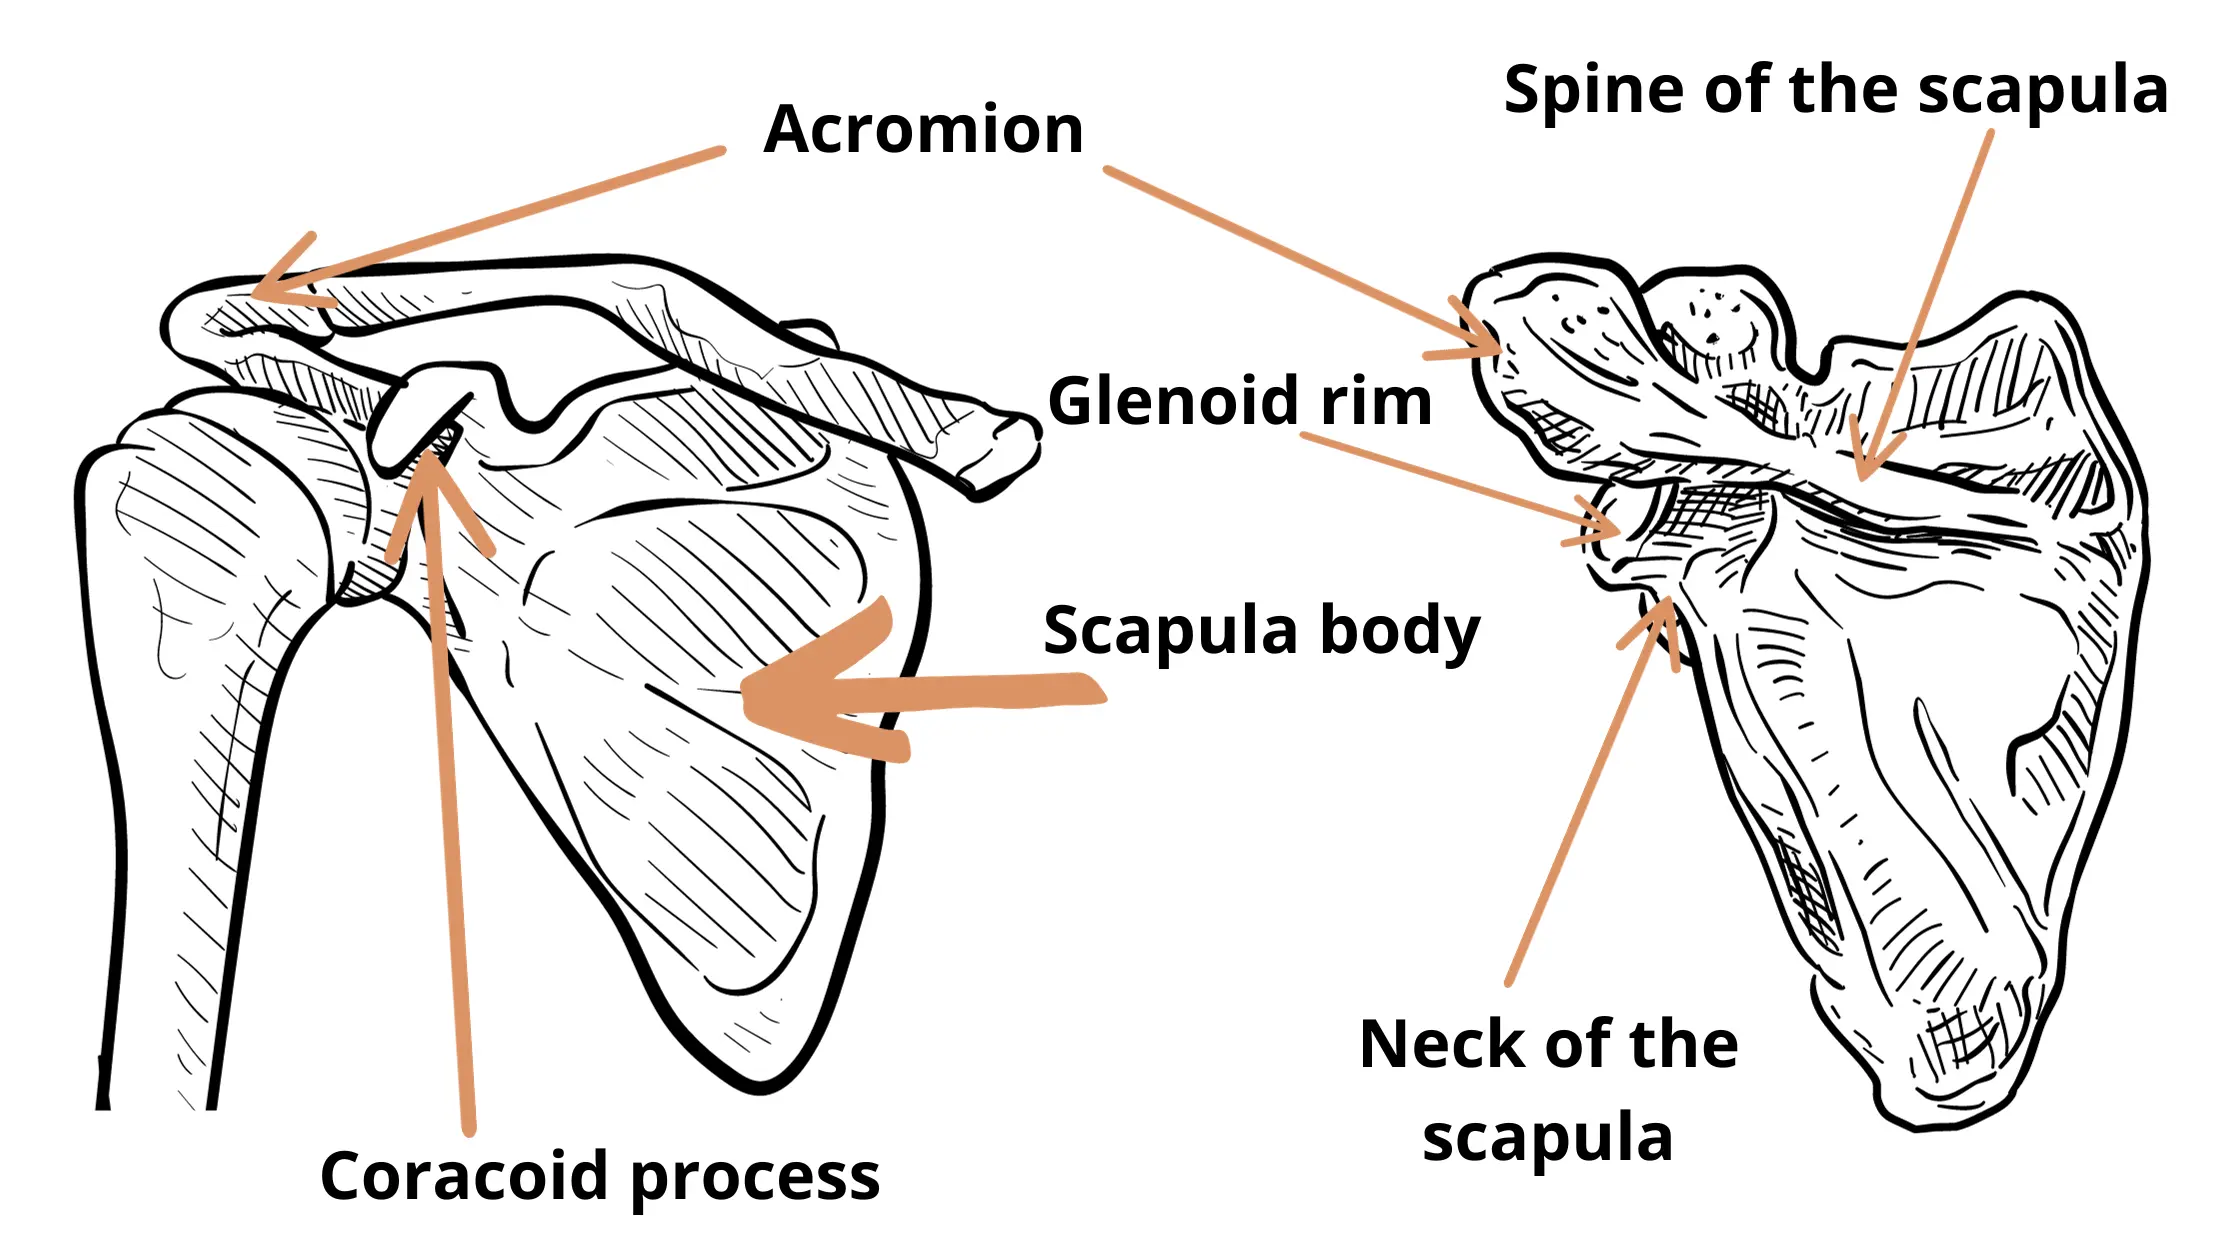 Most common locations where scapula fractures occur such as the acromion glenoid rim, spine of the scapula, scapula body, coracoid process and scapula neck